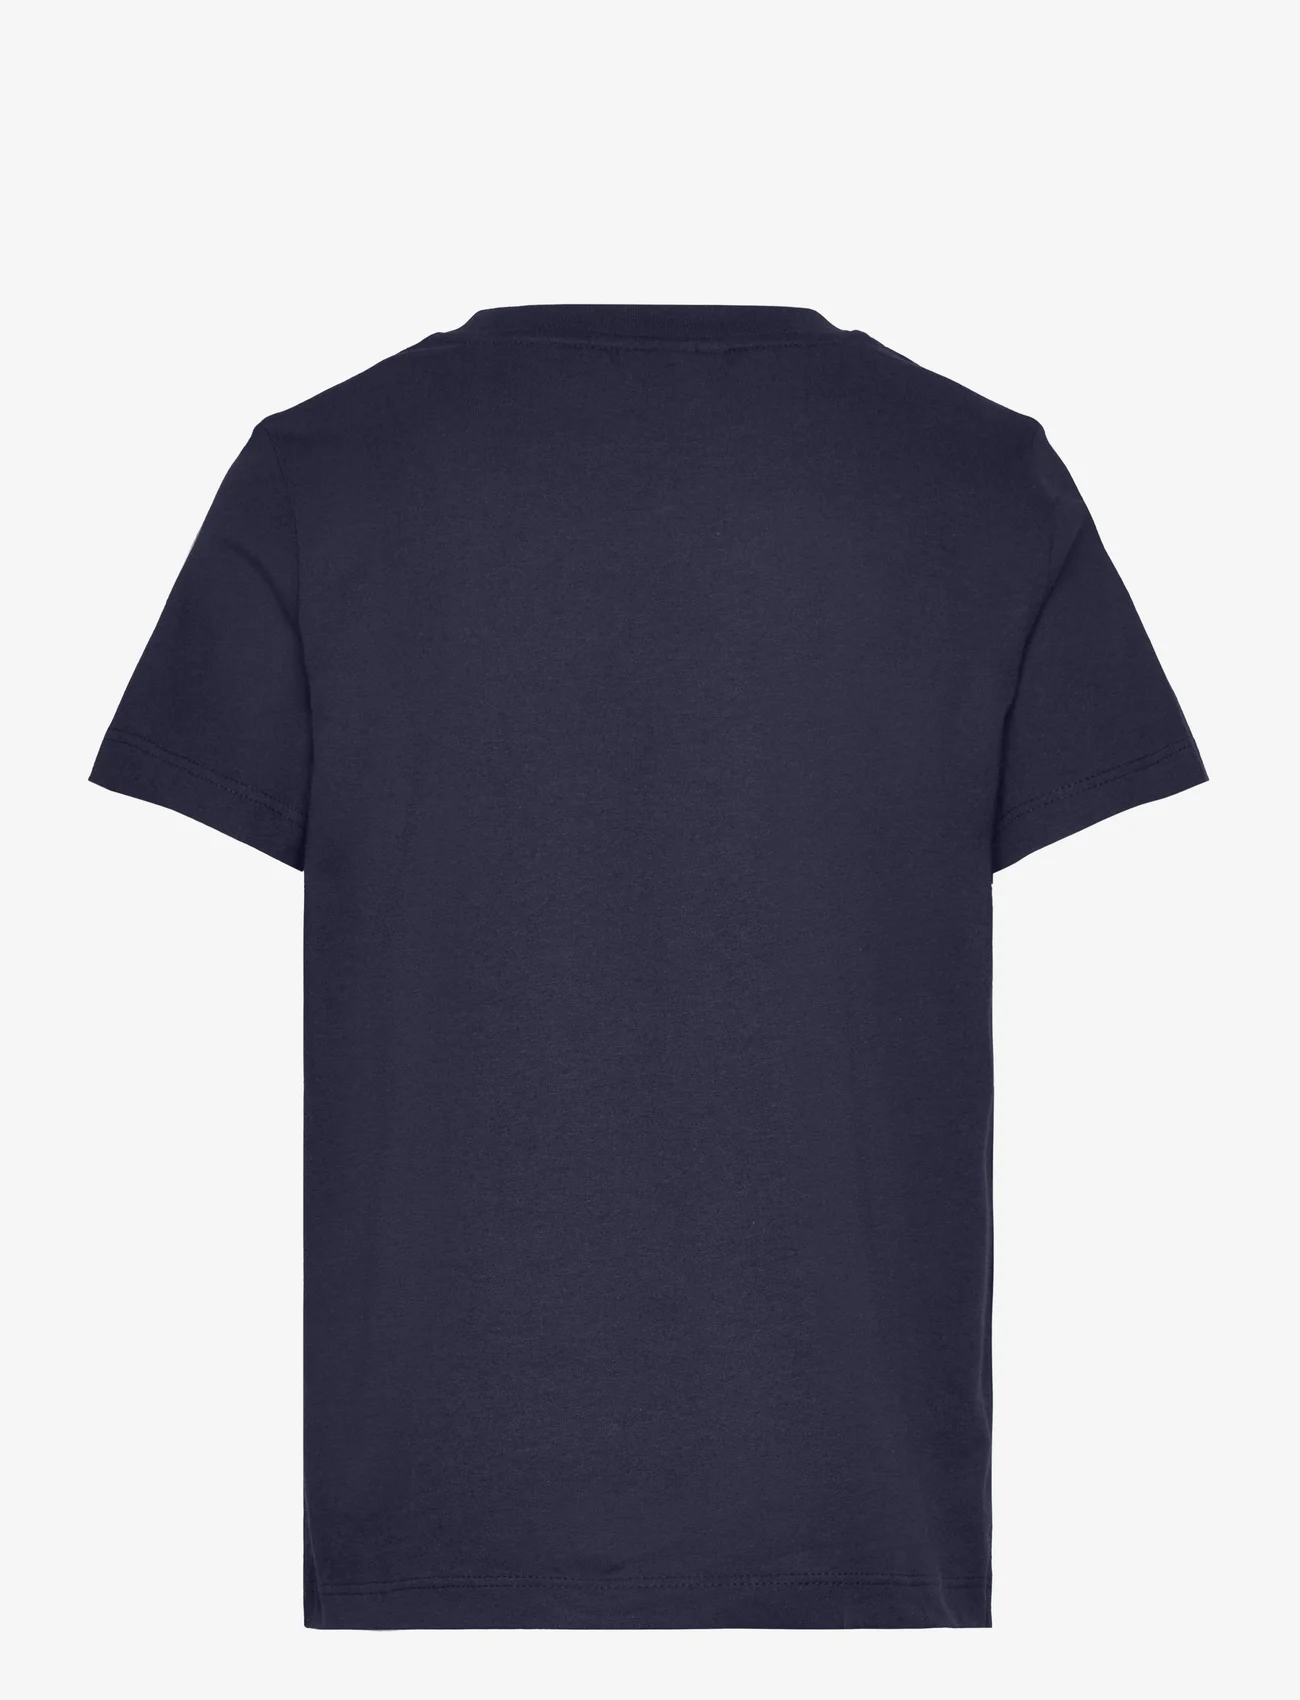 Lacoste - TEE-SHIRT&TURTLE - short-sleeved t-shirts - navy blue - 1